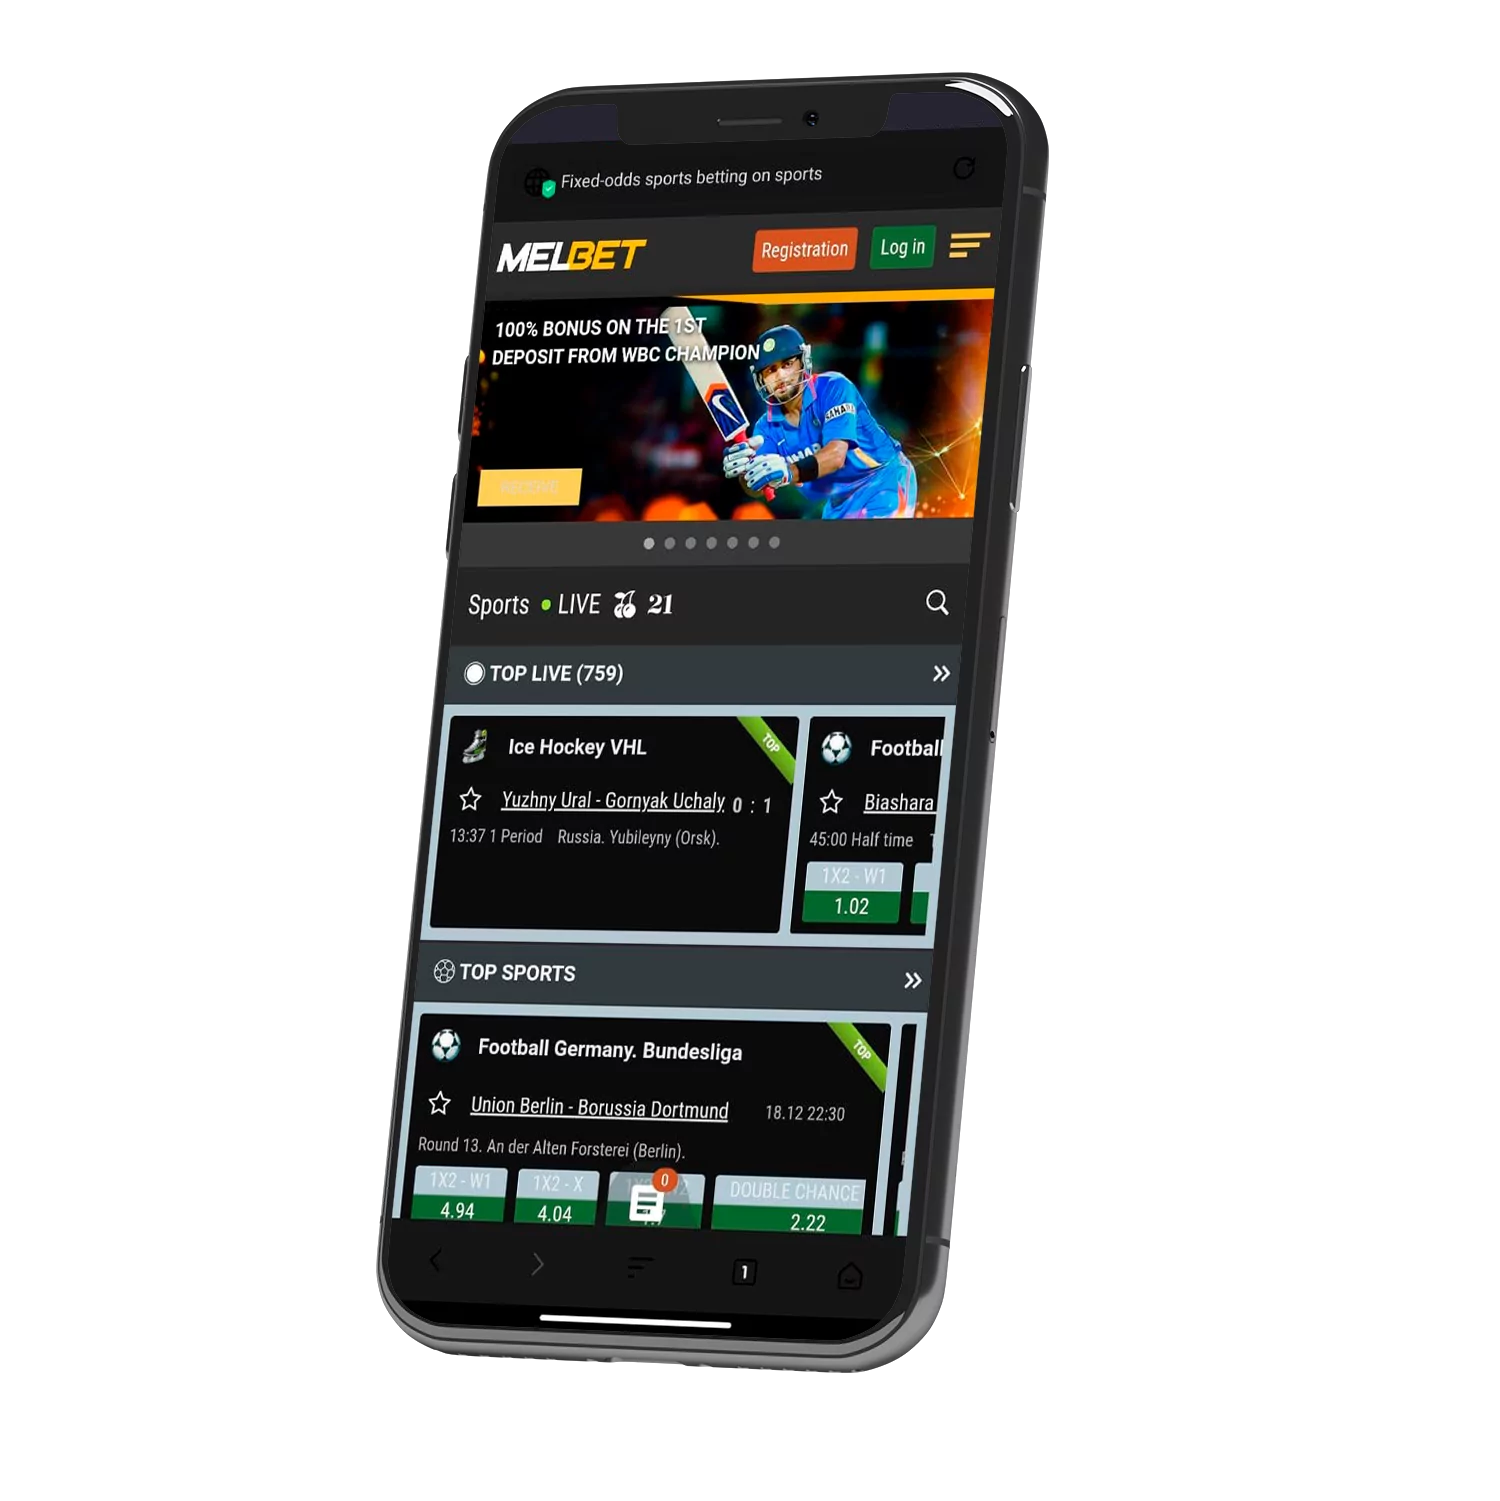 Download and Install the Melbet mobile app to place bets whenever you want.